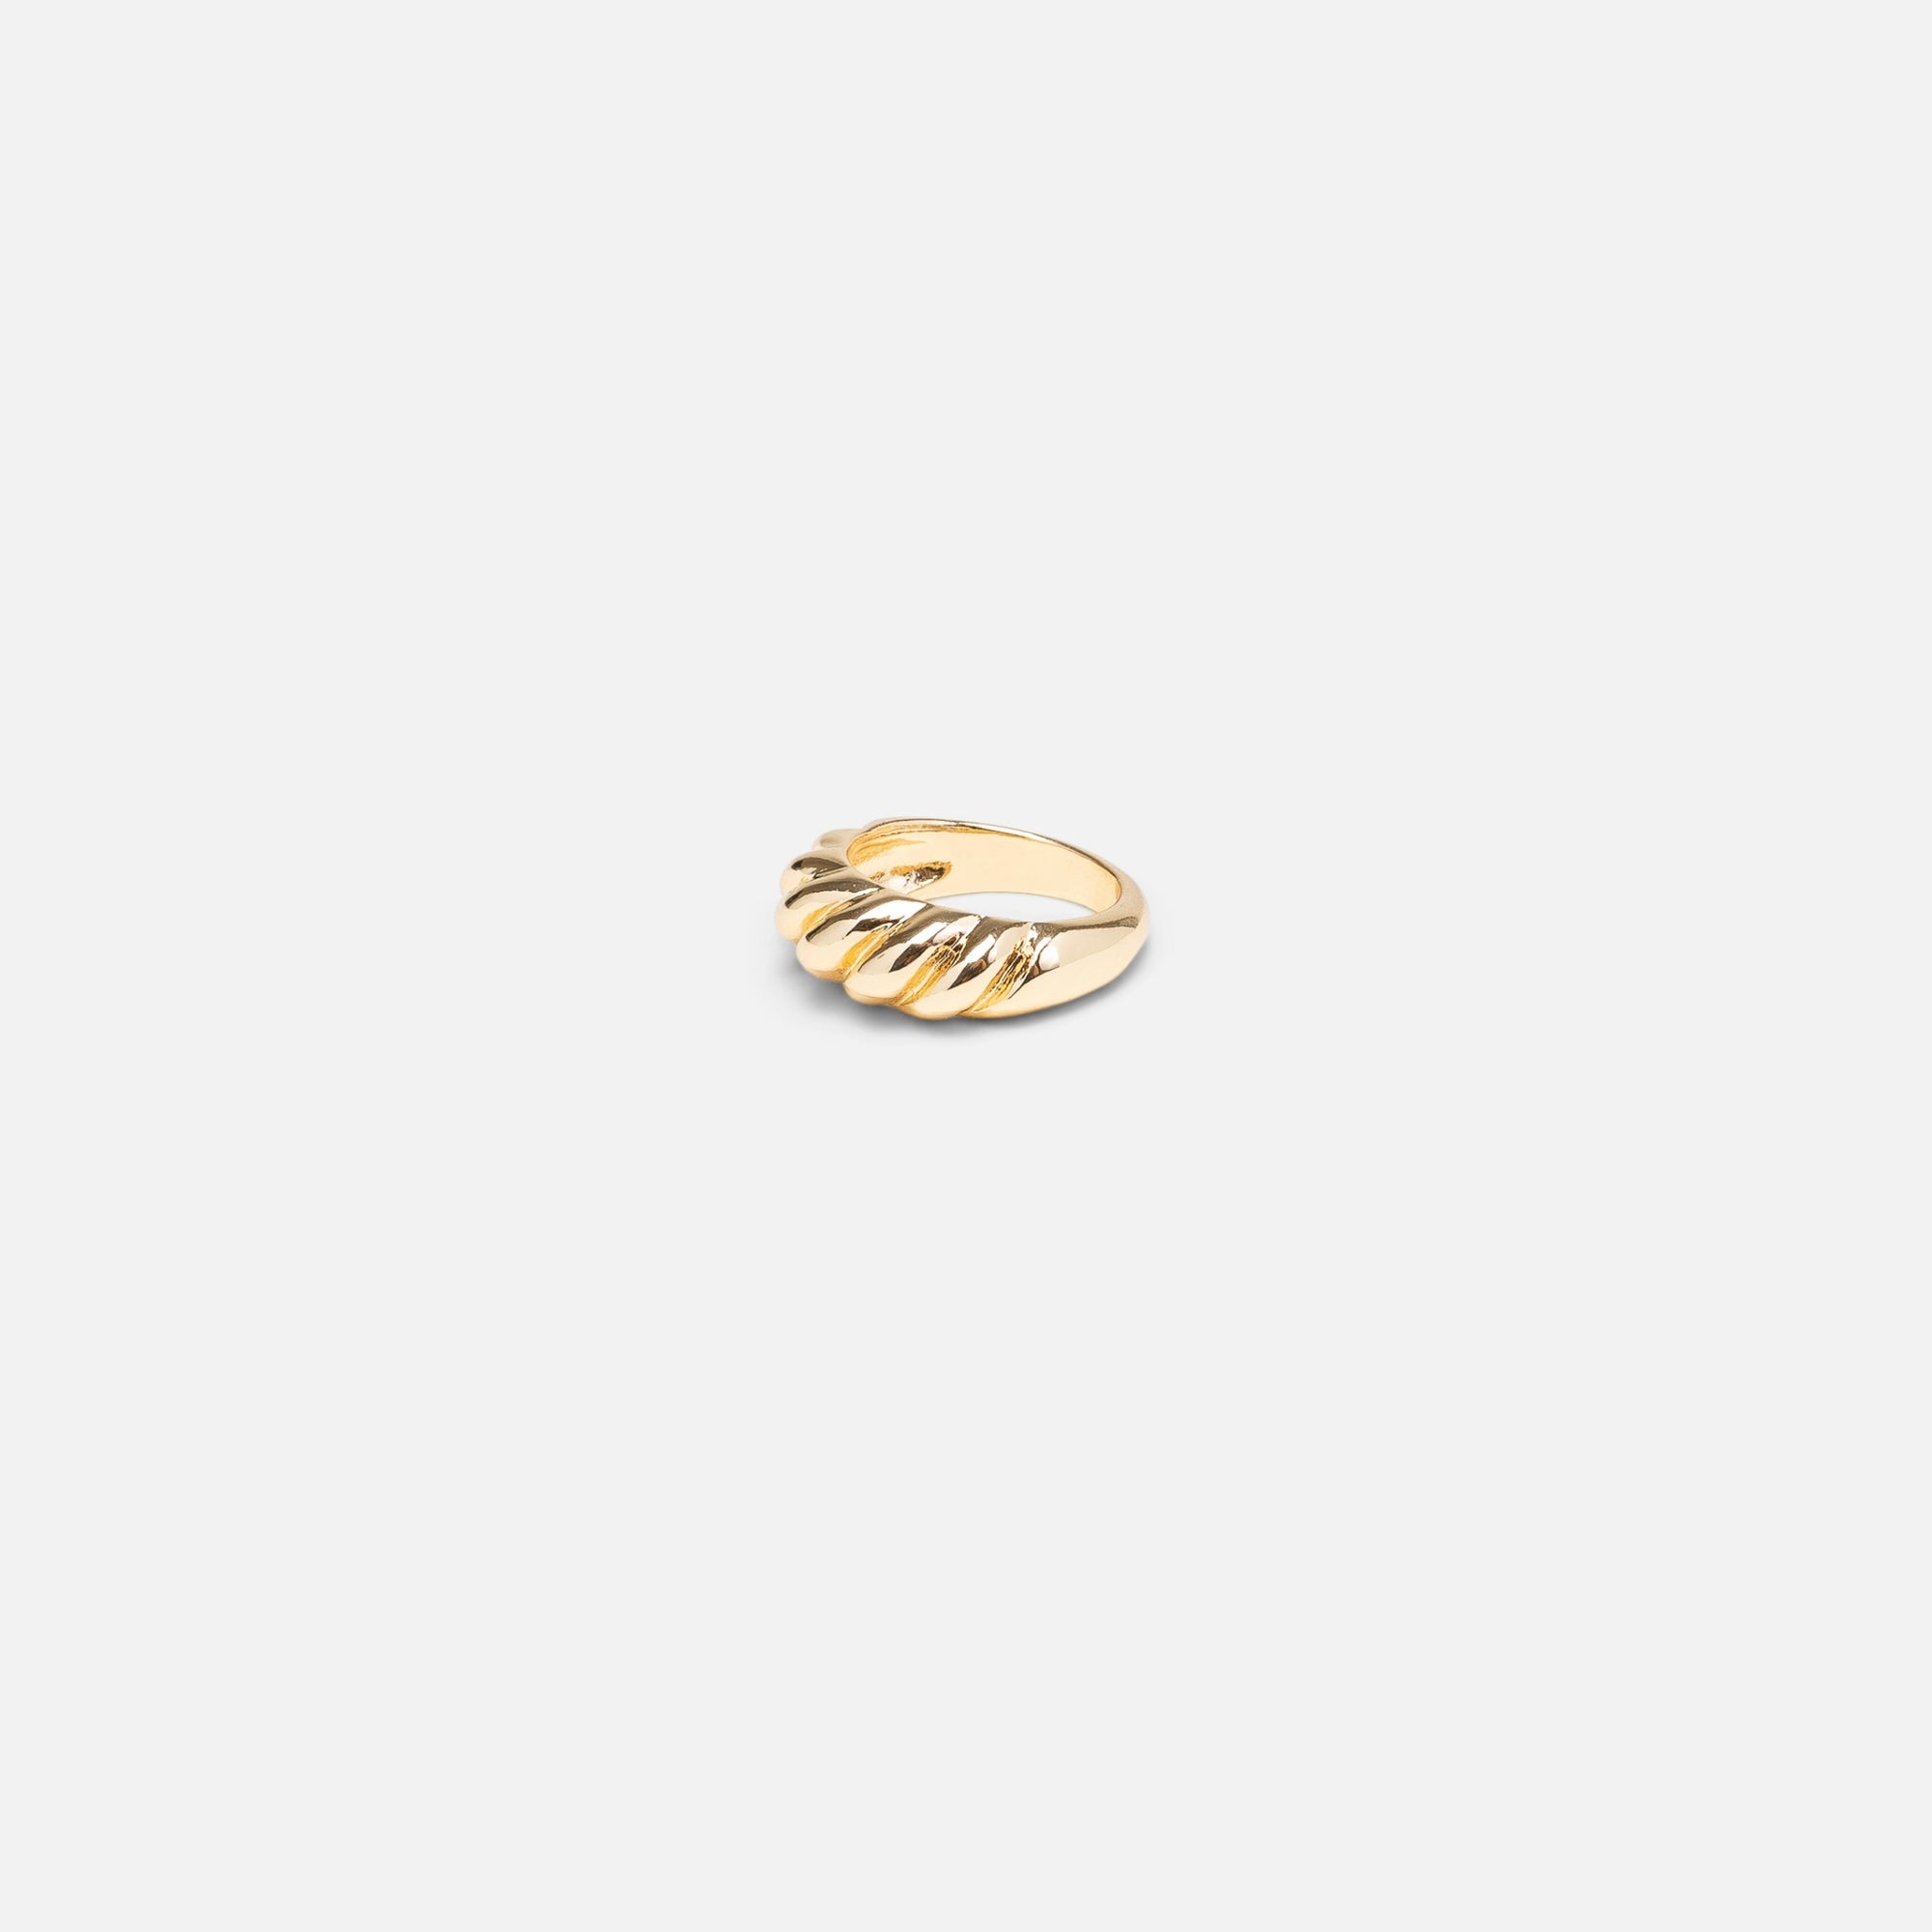 Stainless steel golden ring with twists